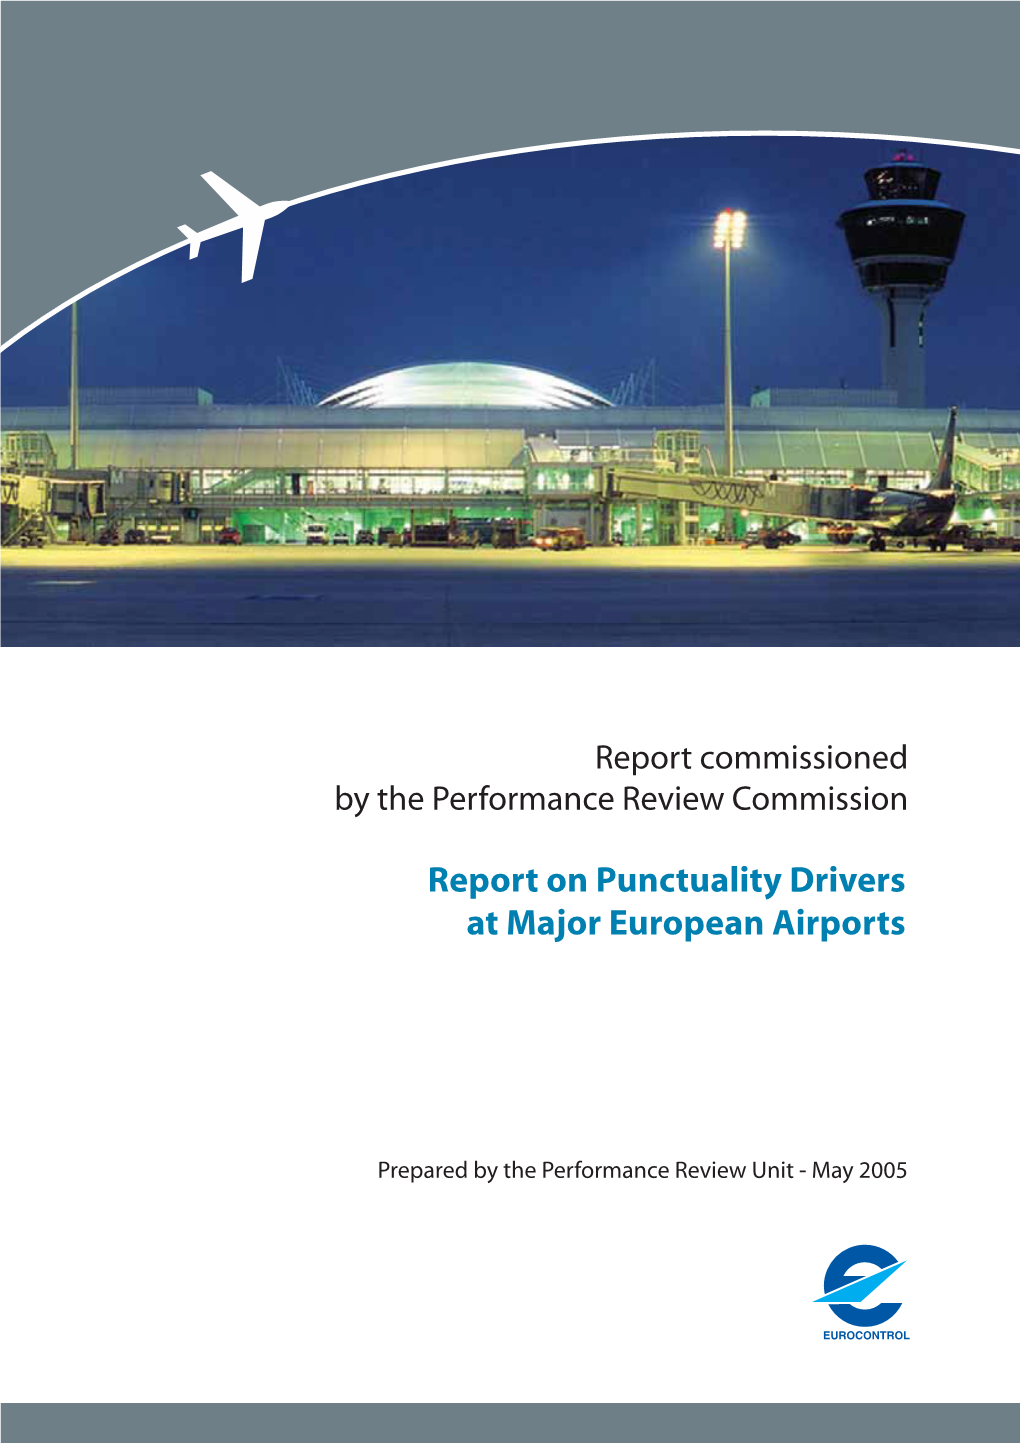 Report on Punctuality Drivers at Major European Airports